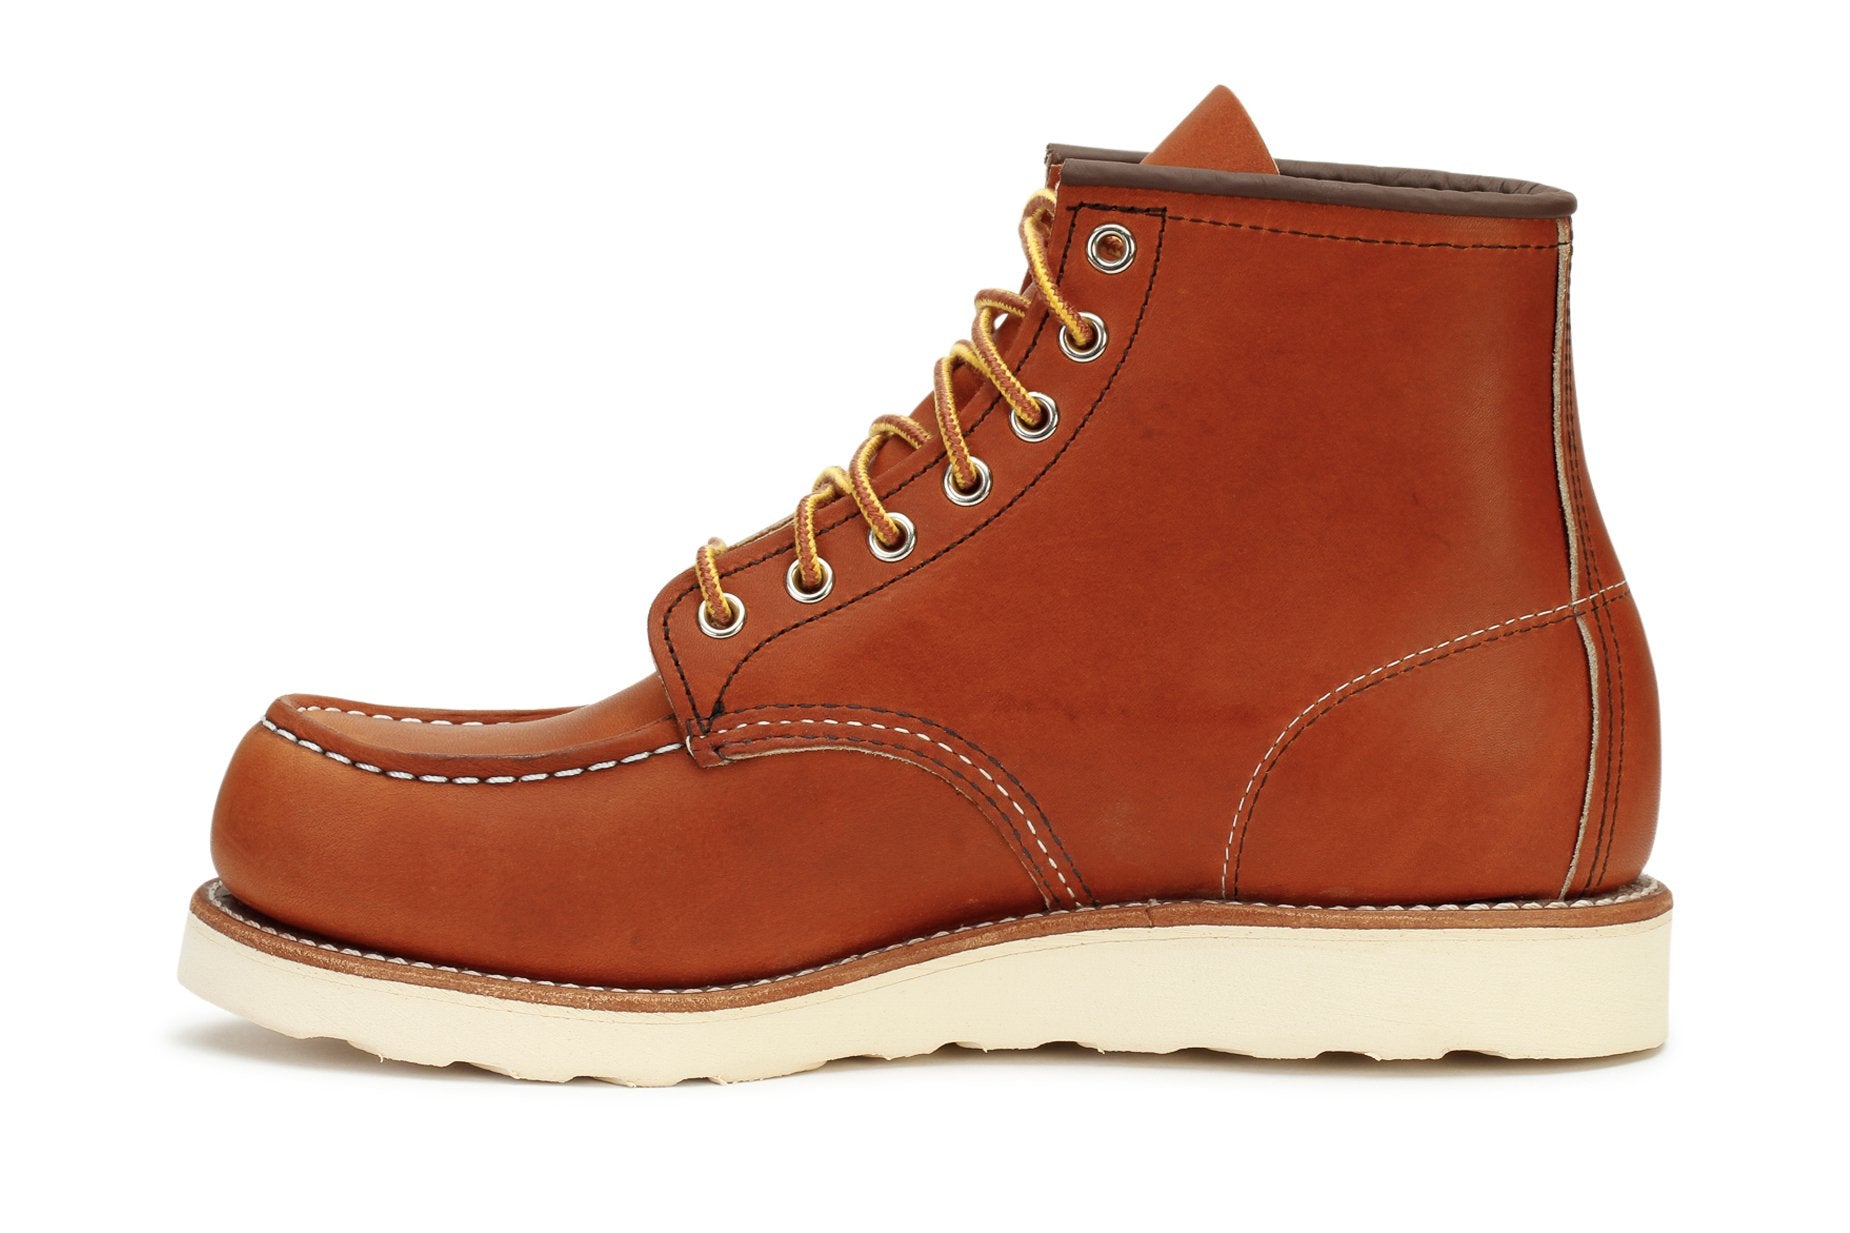 Red Wing Shoes Red Wing Heritage Moc 6 Boot, $221, .com